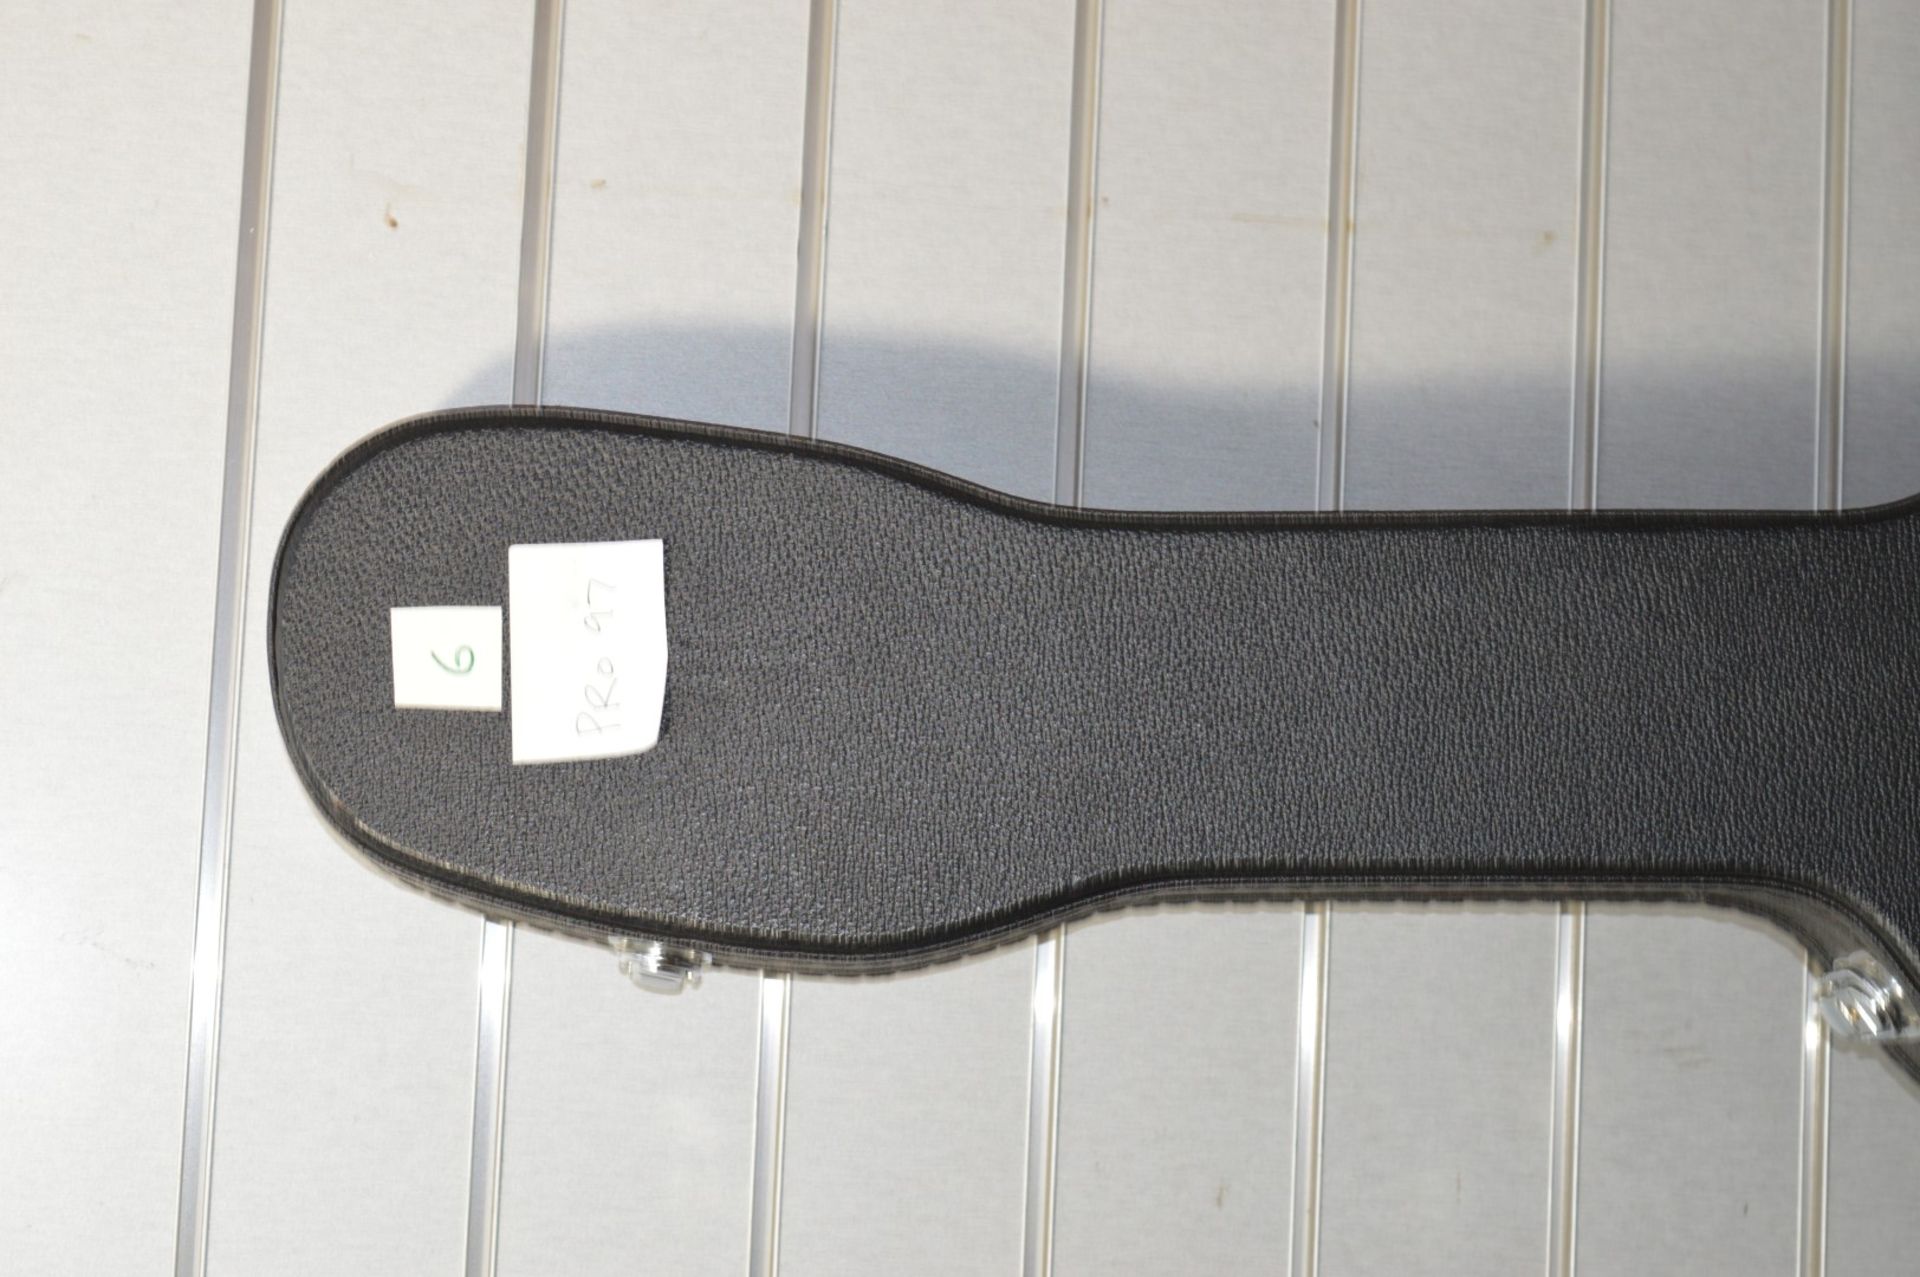 1 x Stagg Basic Electric Hardshell Shaped Guitar Case - CL020 - Ref Pro97 - Location: Altrincham - Image 3 of 8